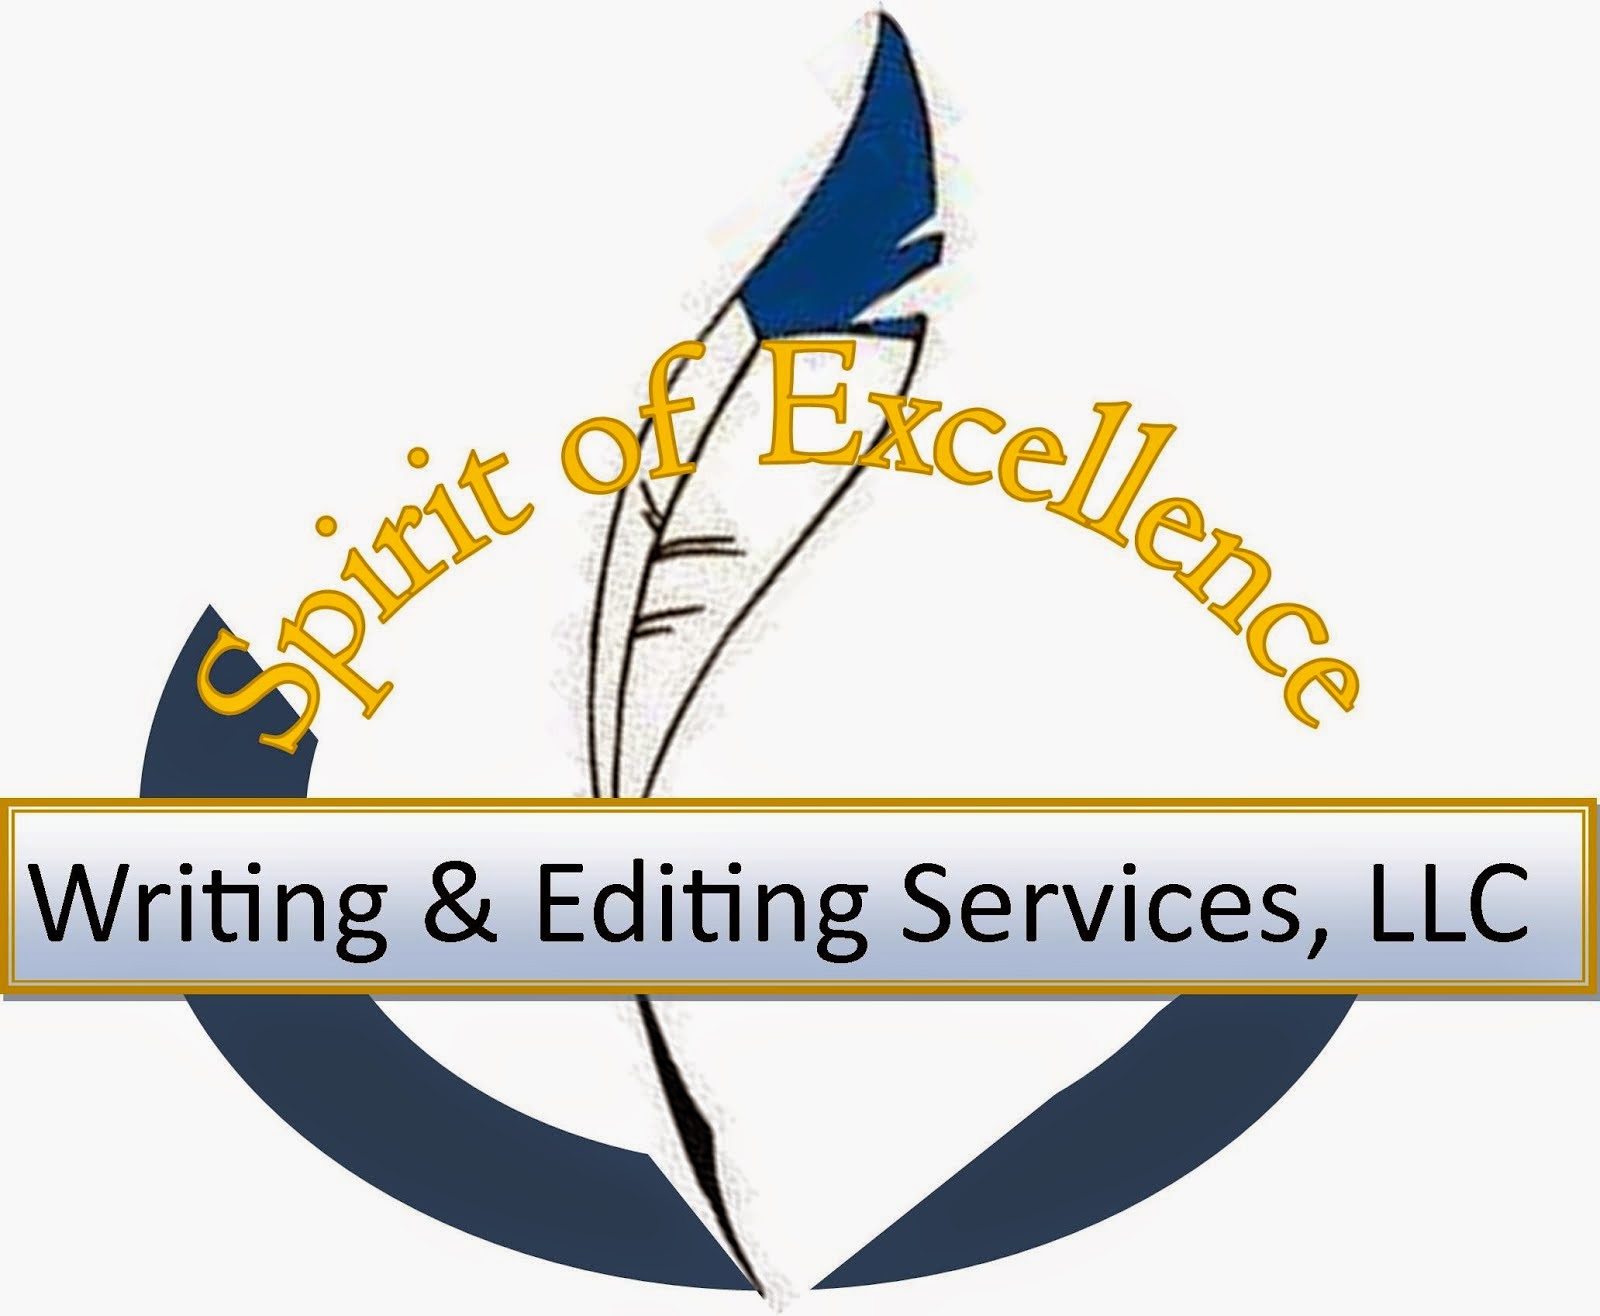 Spirit of Excellence Writing & Editing Services, LLC